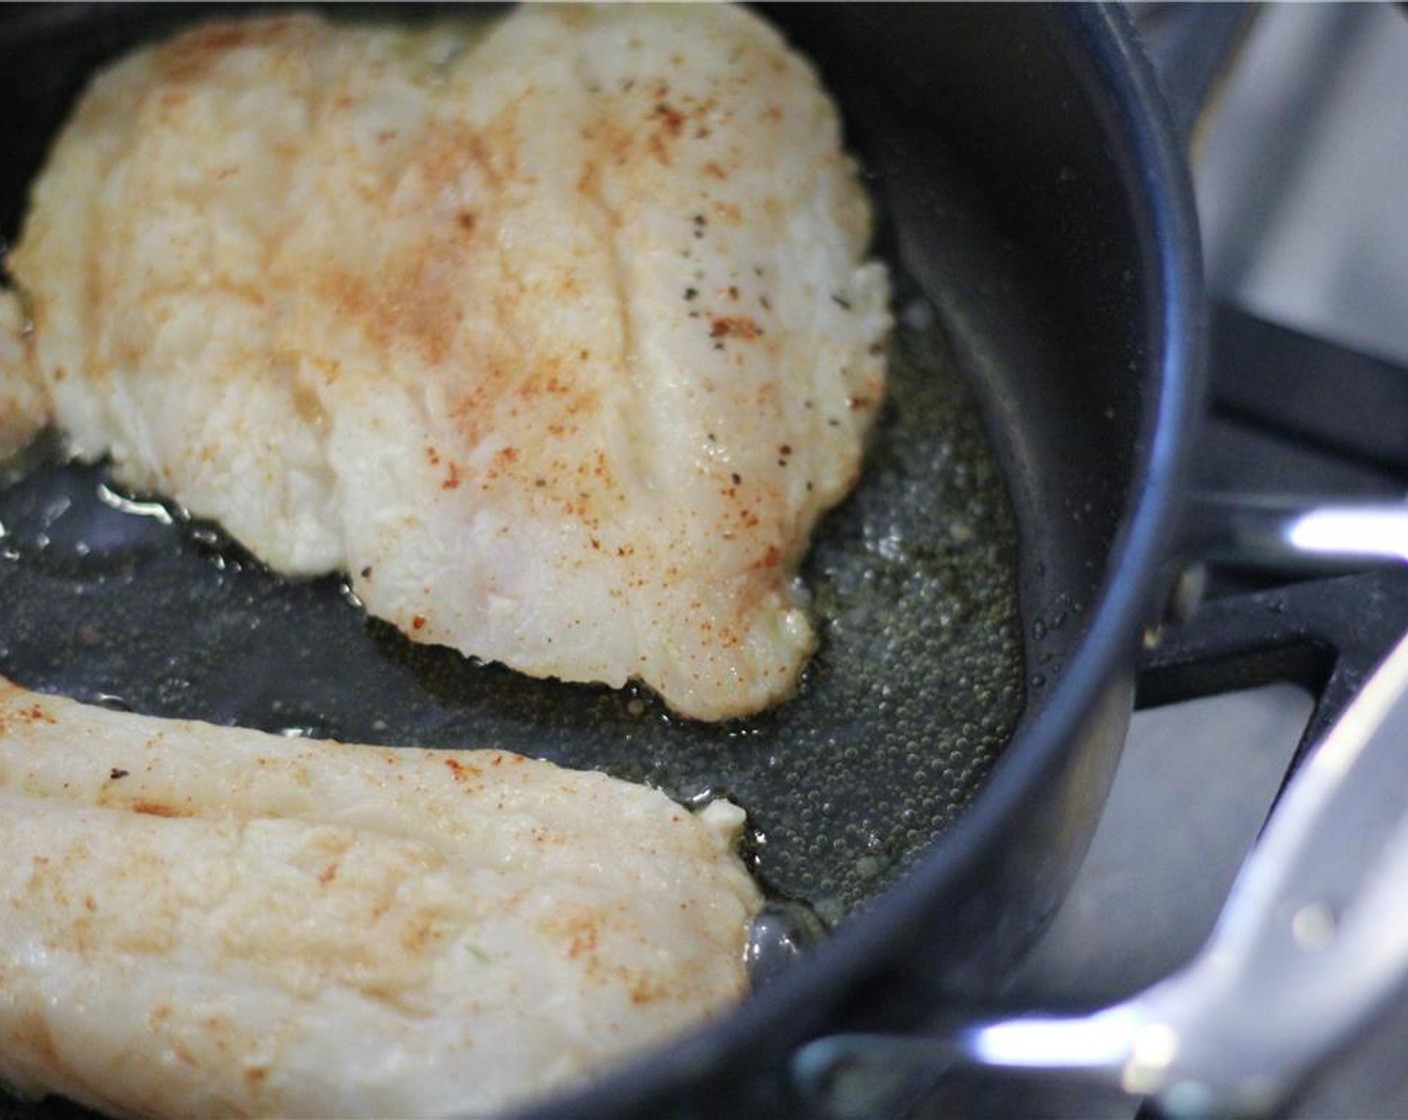 step 7 In a large skillet, heat olive oil (1 Tbsp) over medium heat. Add fish and cook until outer edges are golden and fish flakes easily, about 5-6 minutes on each side.